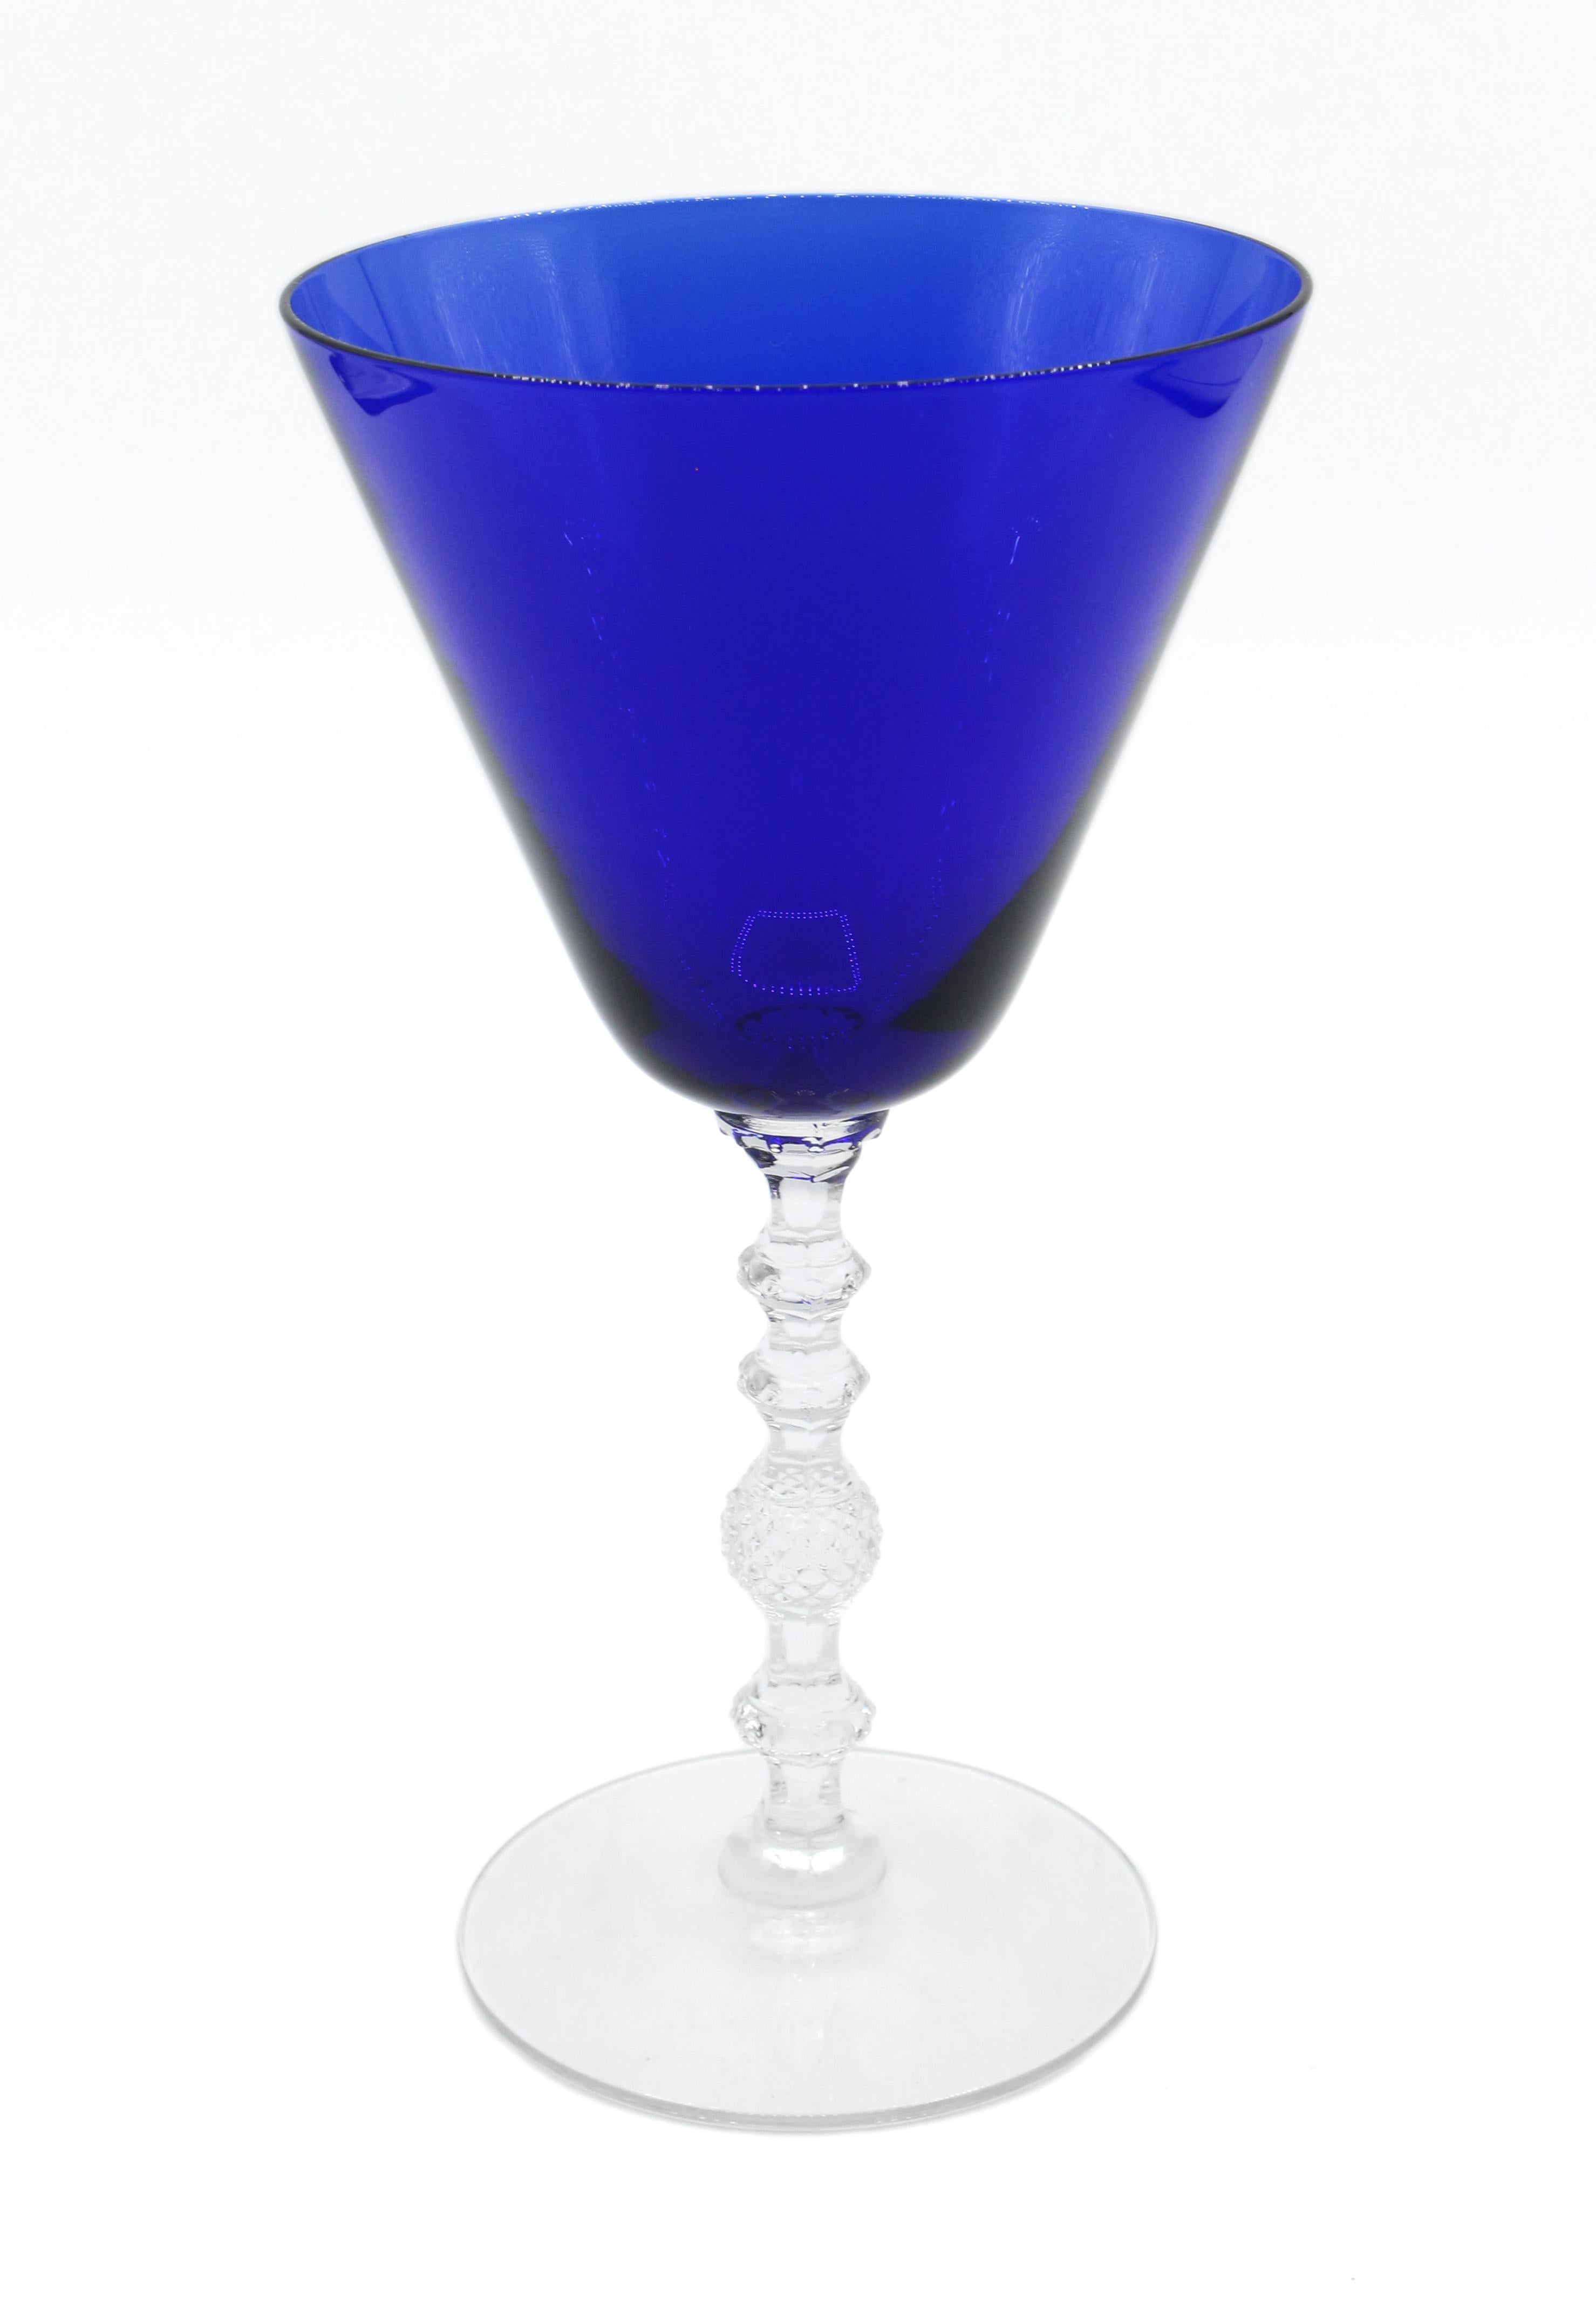 A set of 10 water or large wine goblets by Cambridge Glass Co., Ohio, c.1930s. Cobalt Blue bowls with faceted, molded clear glass stems & bases. Pattern 3122, rarely found. 
7